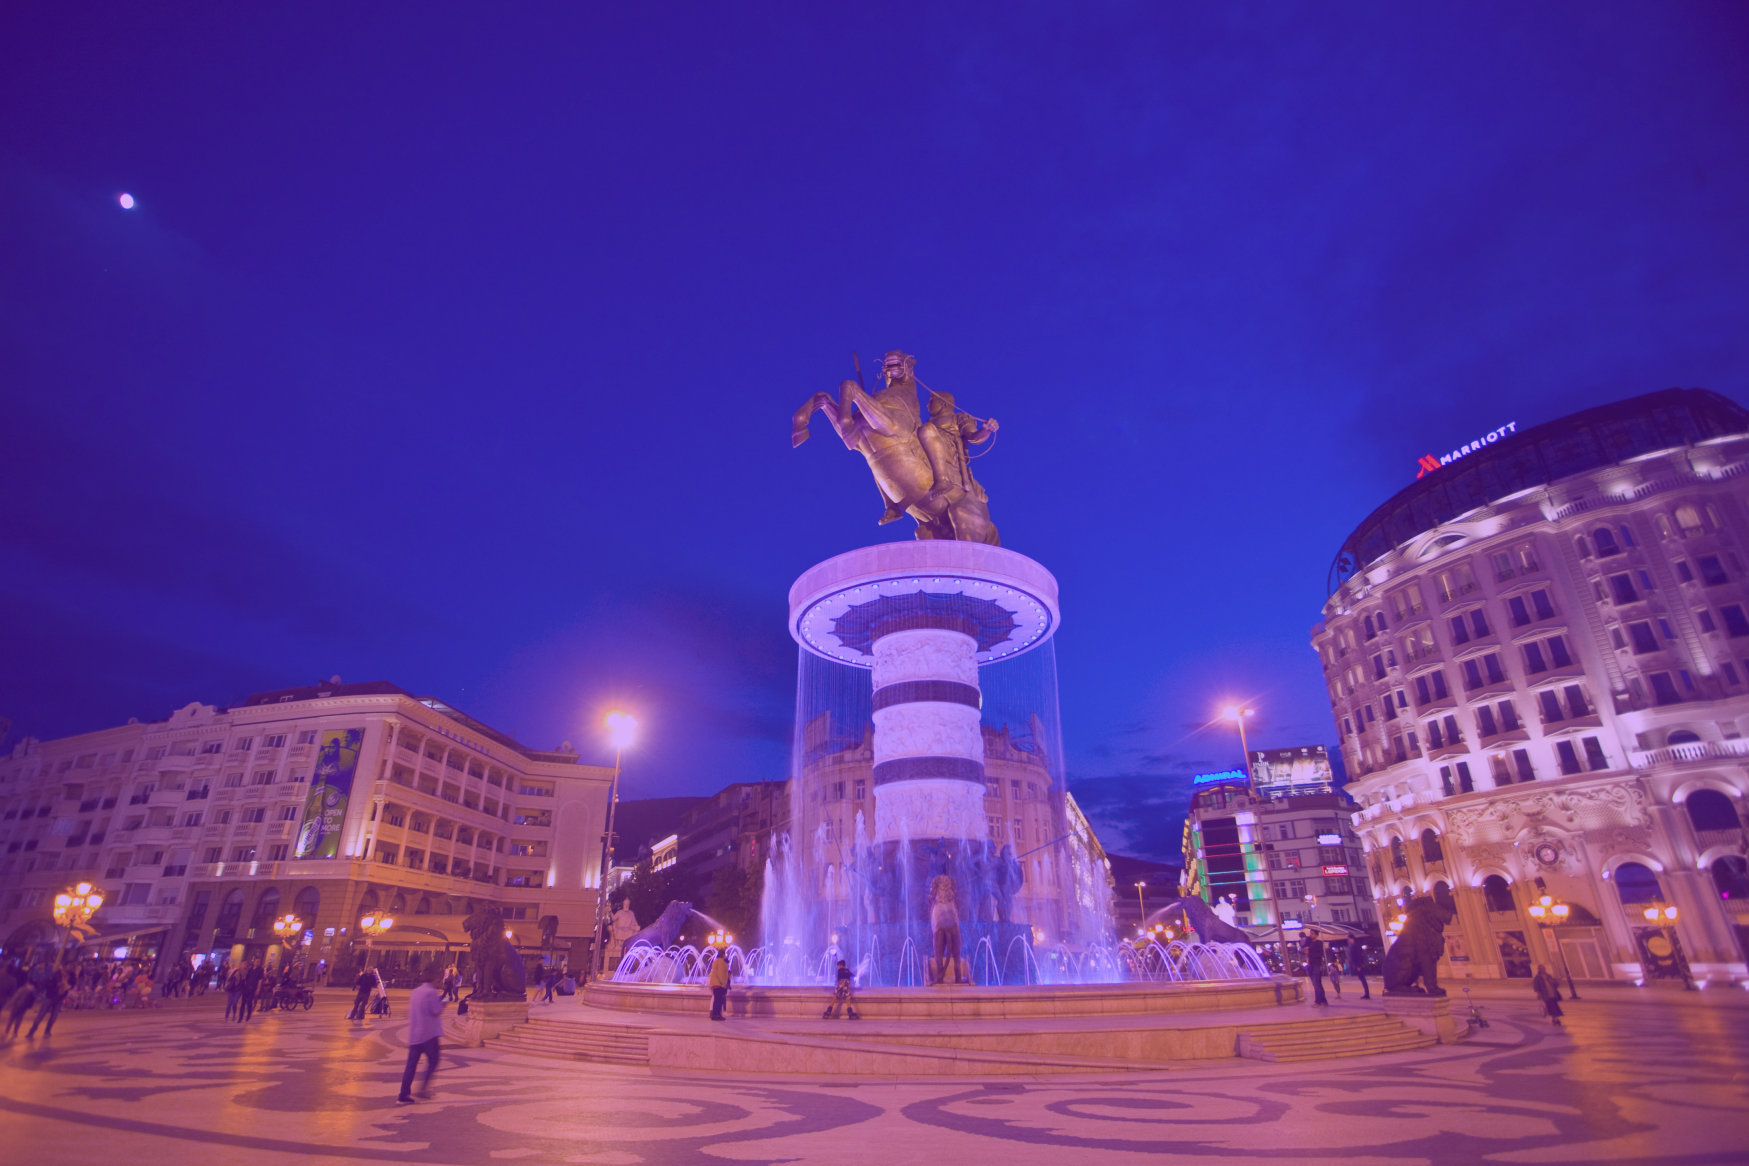 Photo: "Macedonia Square, Skopje", by Mike Norton, licensed under CC BY 2.0. Hue modified from the original